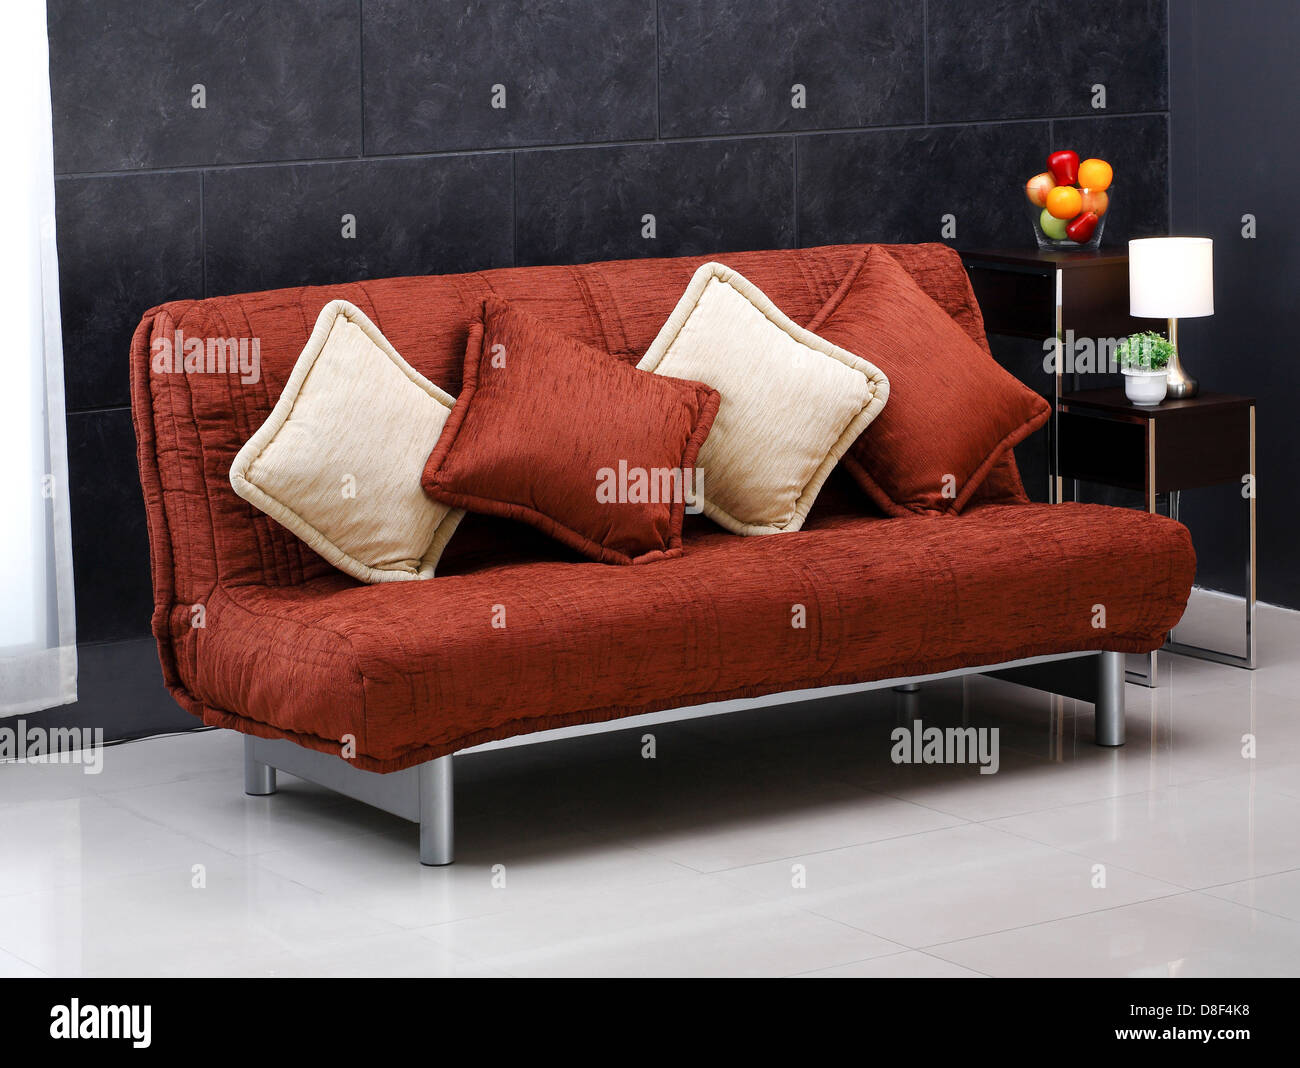 A luxury comfortable sofa bed and cute cushions Stock Photo